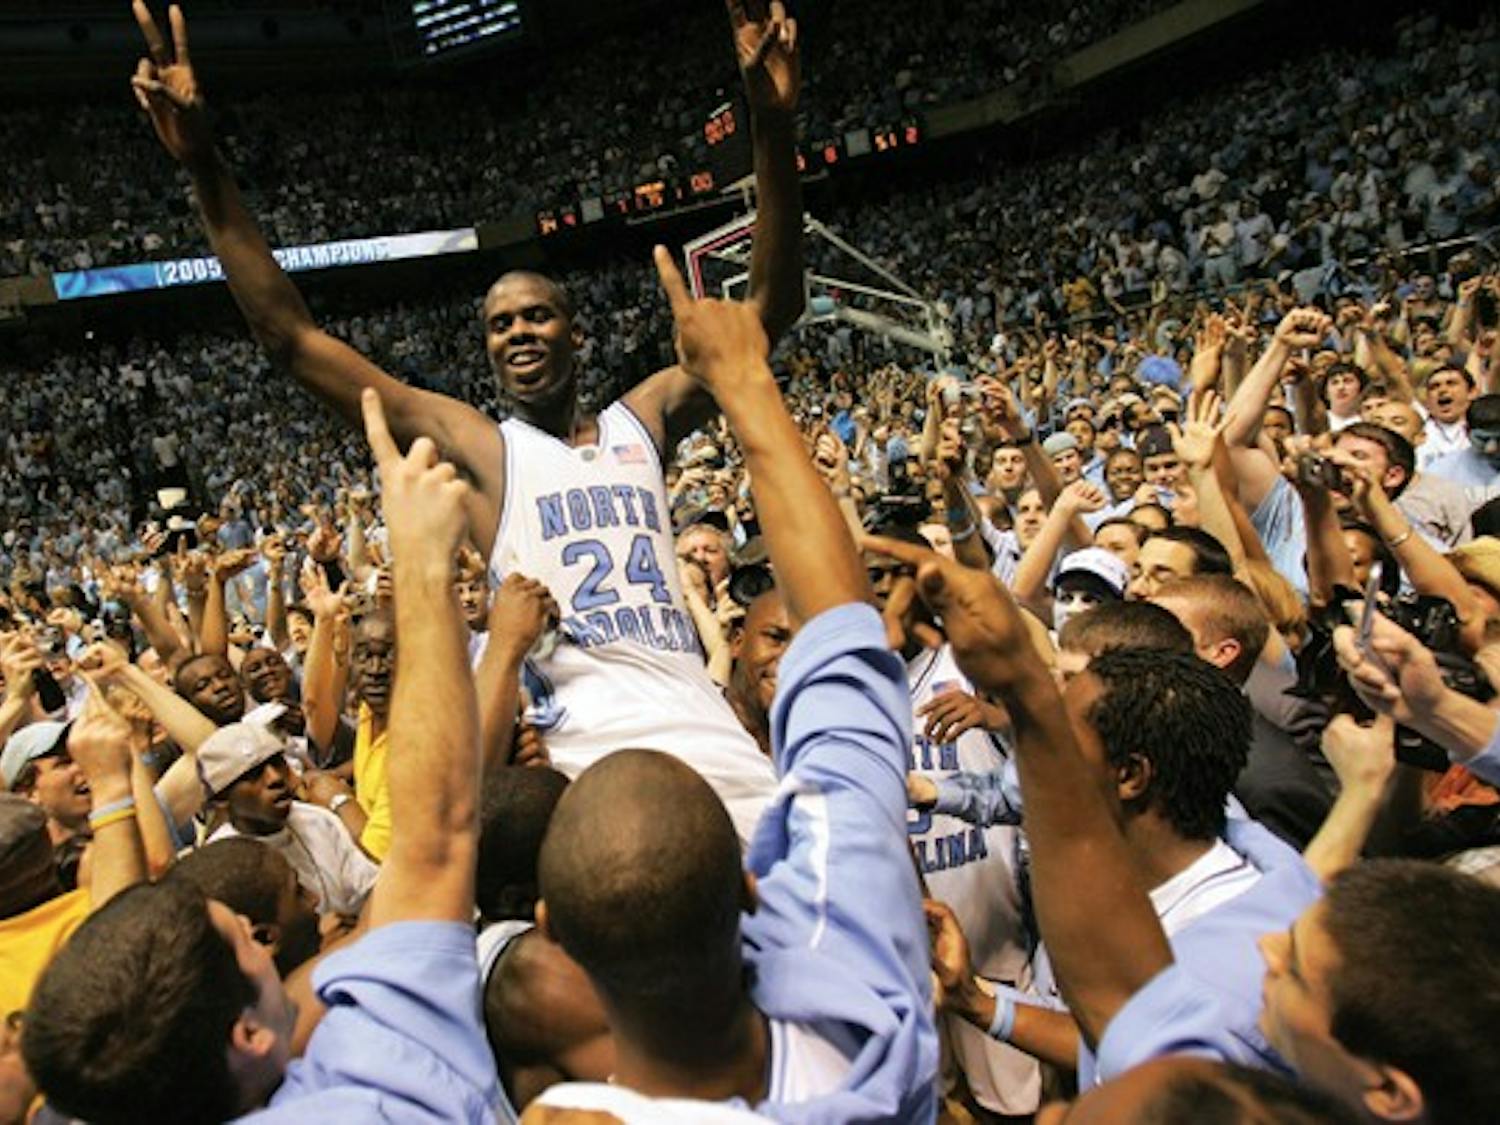 North Carolina's Marvin Williams (24) rides a wave of jubilant, powder blue-clad fans after UNC's 75-73 win against Duke on Sunday, March 6, 2005. William's put-back and free throw gave the Tar Heels the winning margin with 17 seconds left.